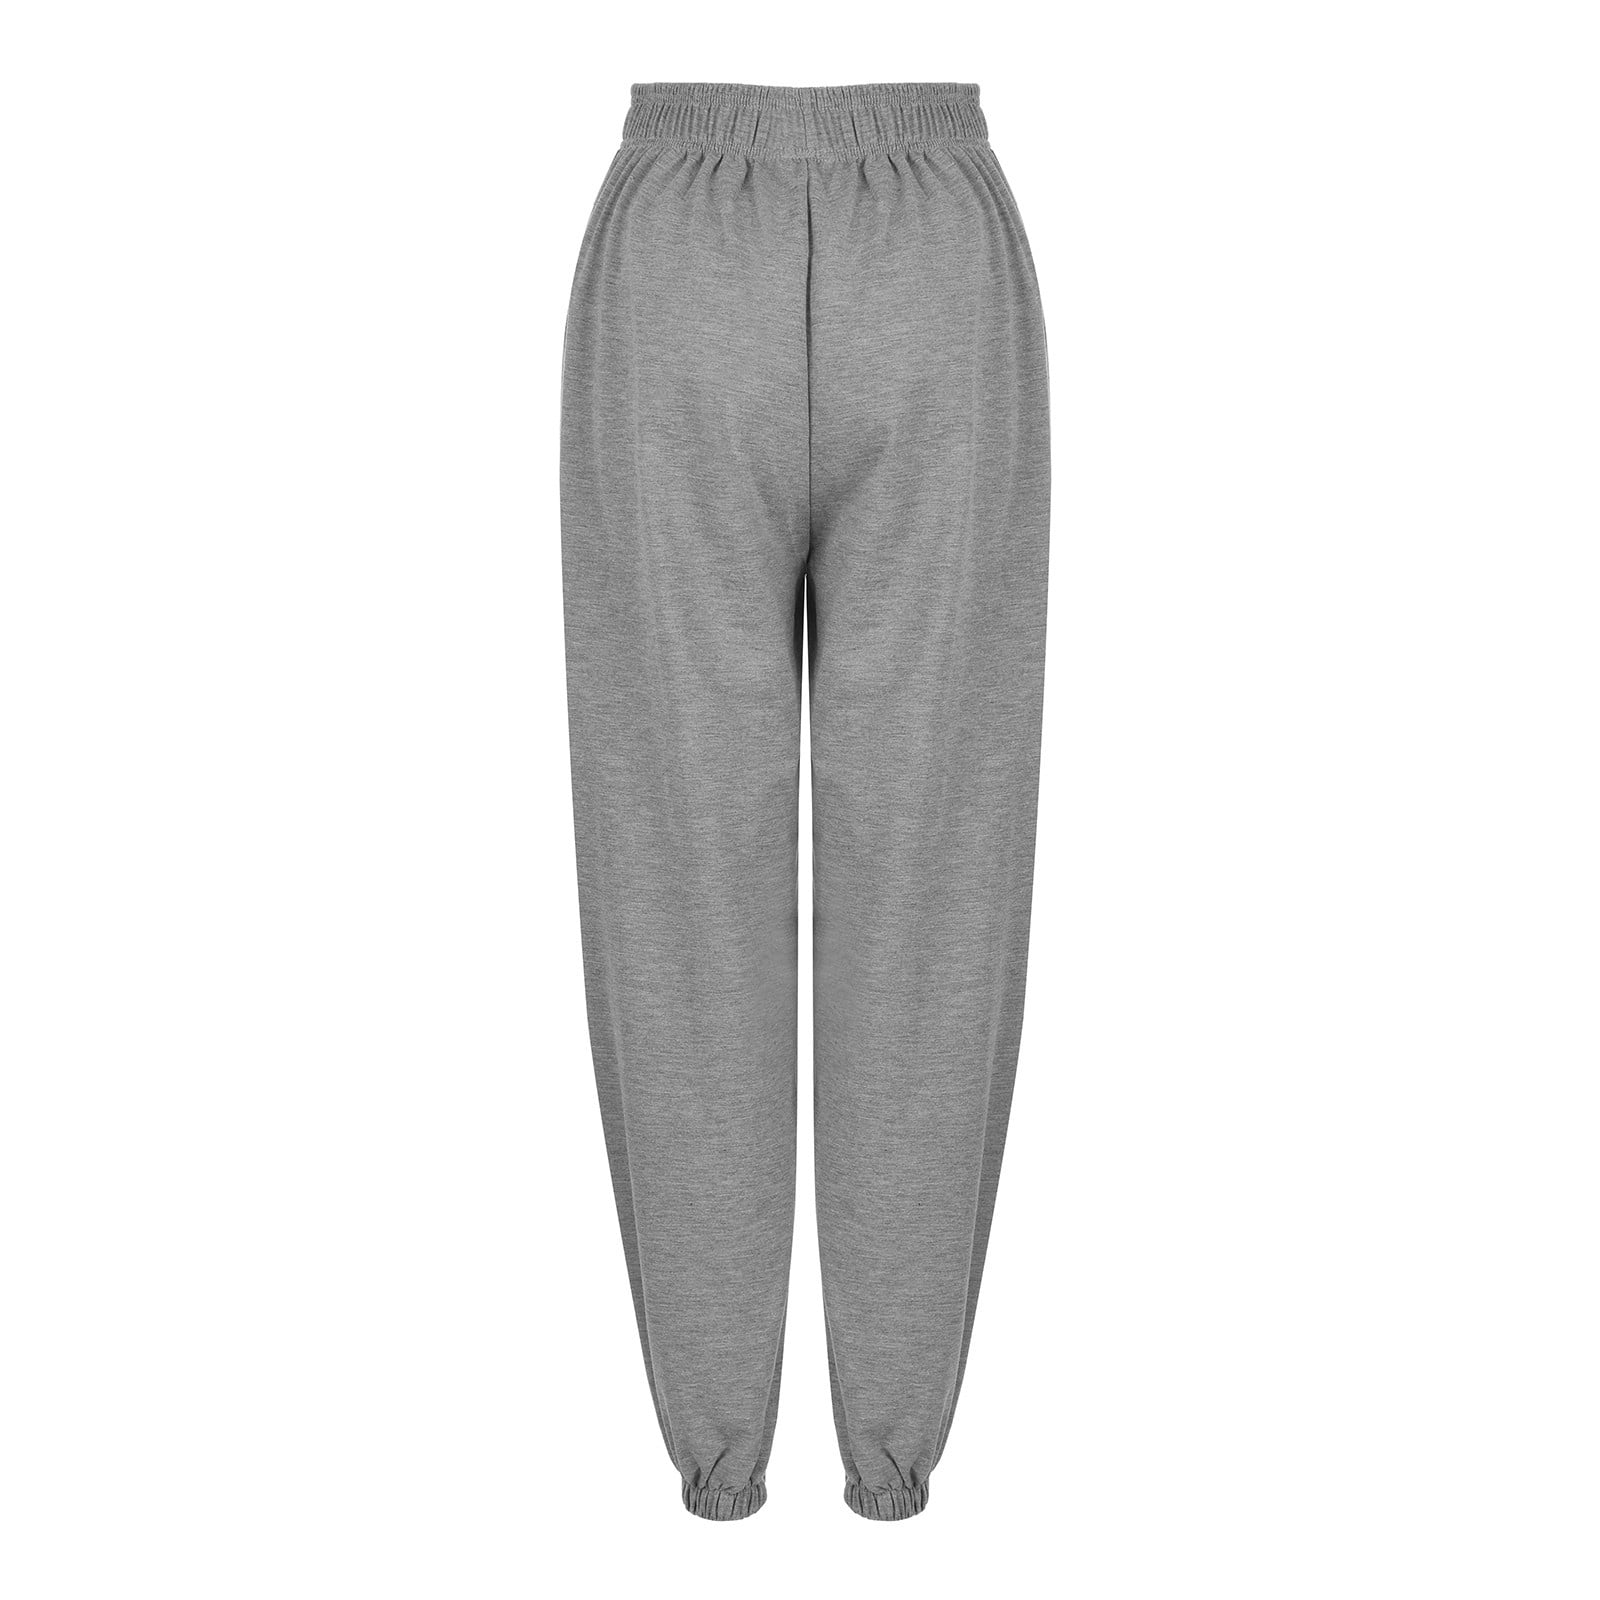 Wicked Stitch, Pants & Jumpsuits, Nwt Wicked Stitch Womens Xl Gray Joggers  Pants Sweatpants Zip Pockets Tapered